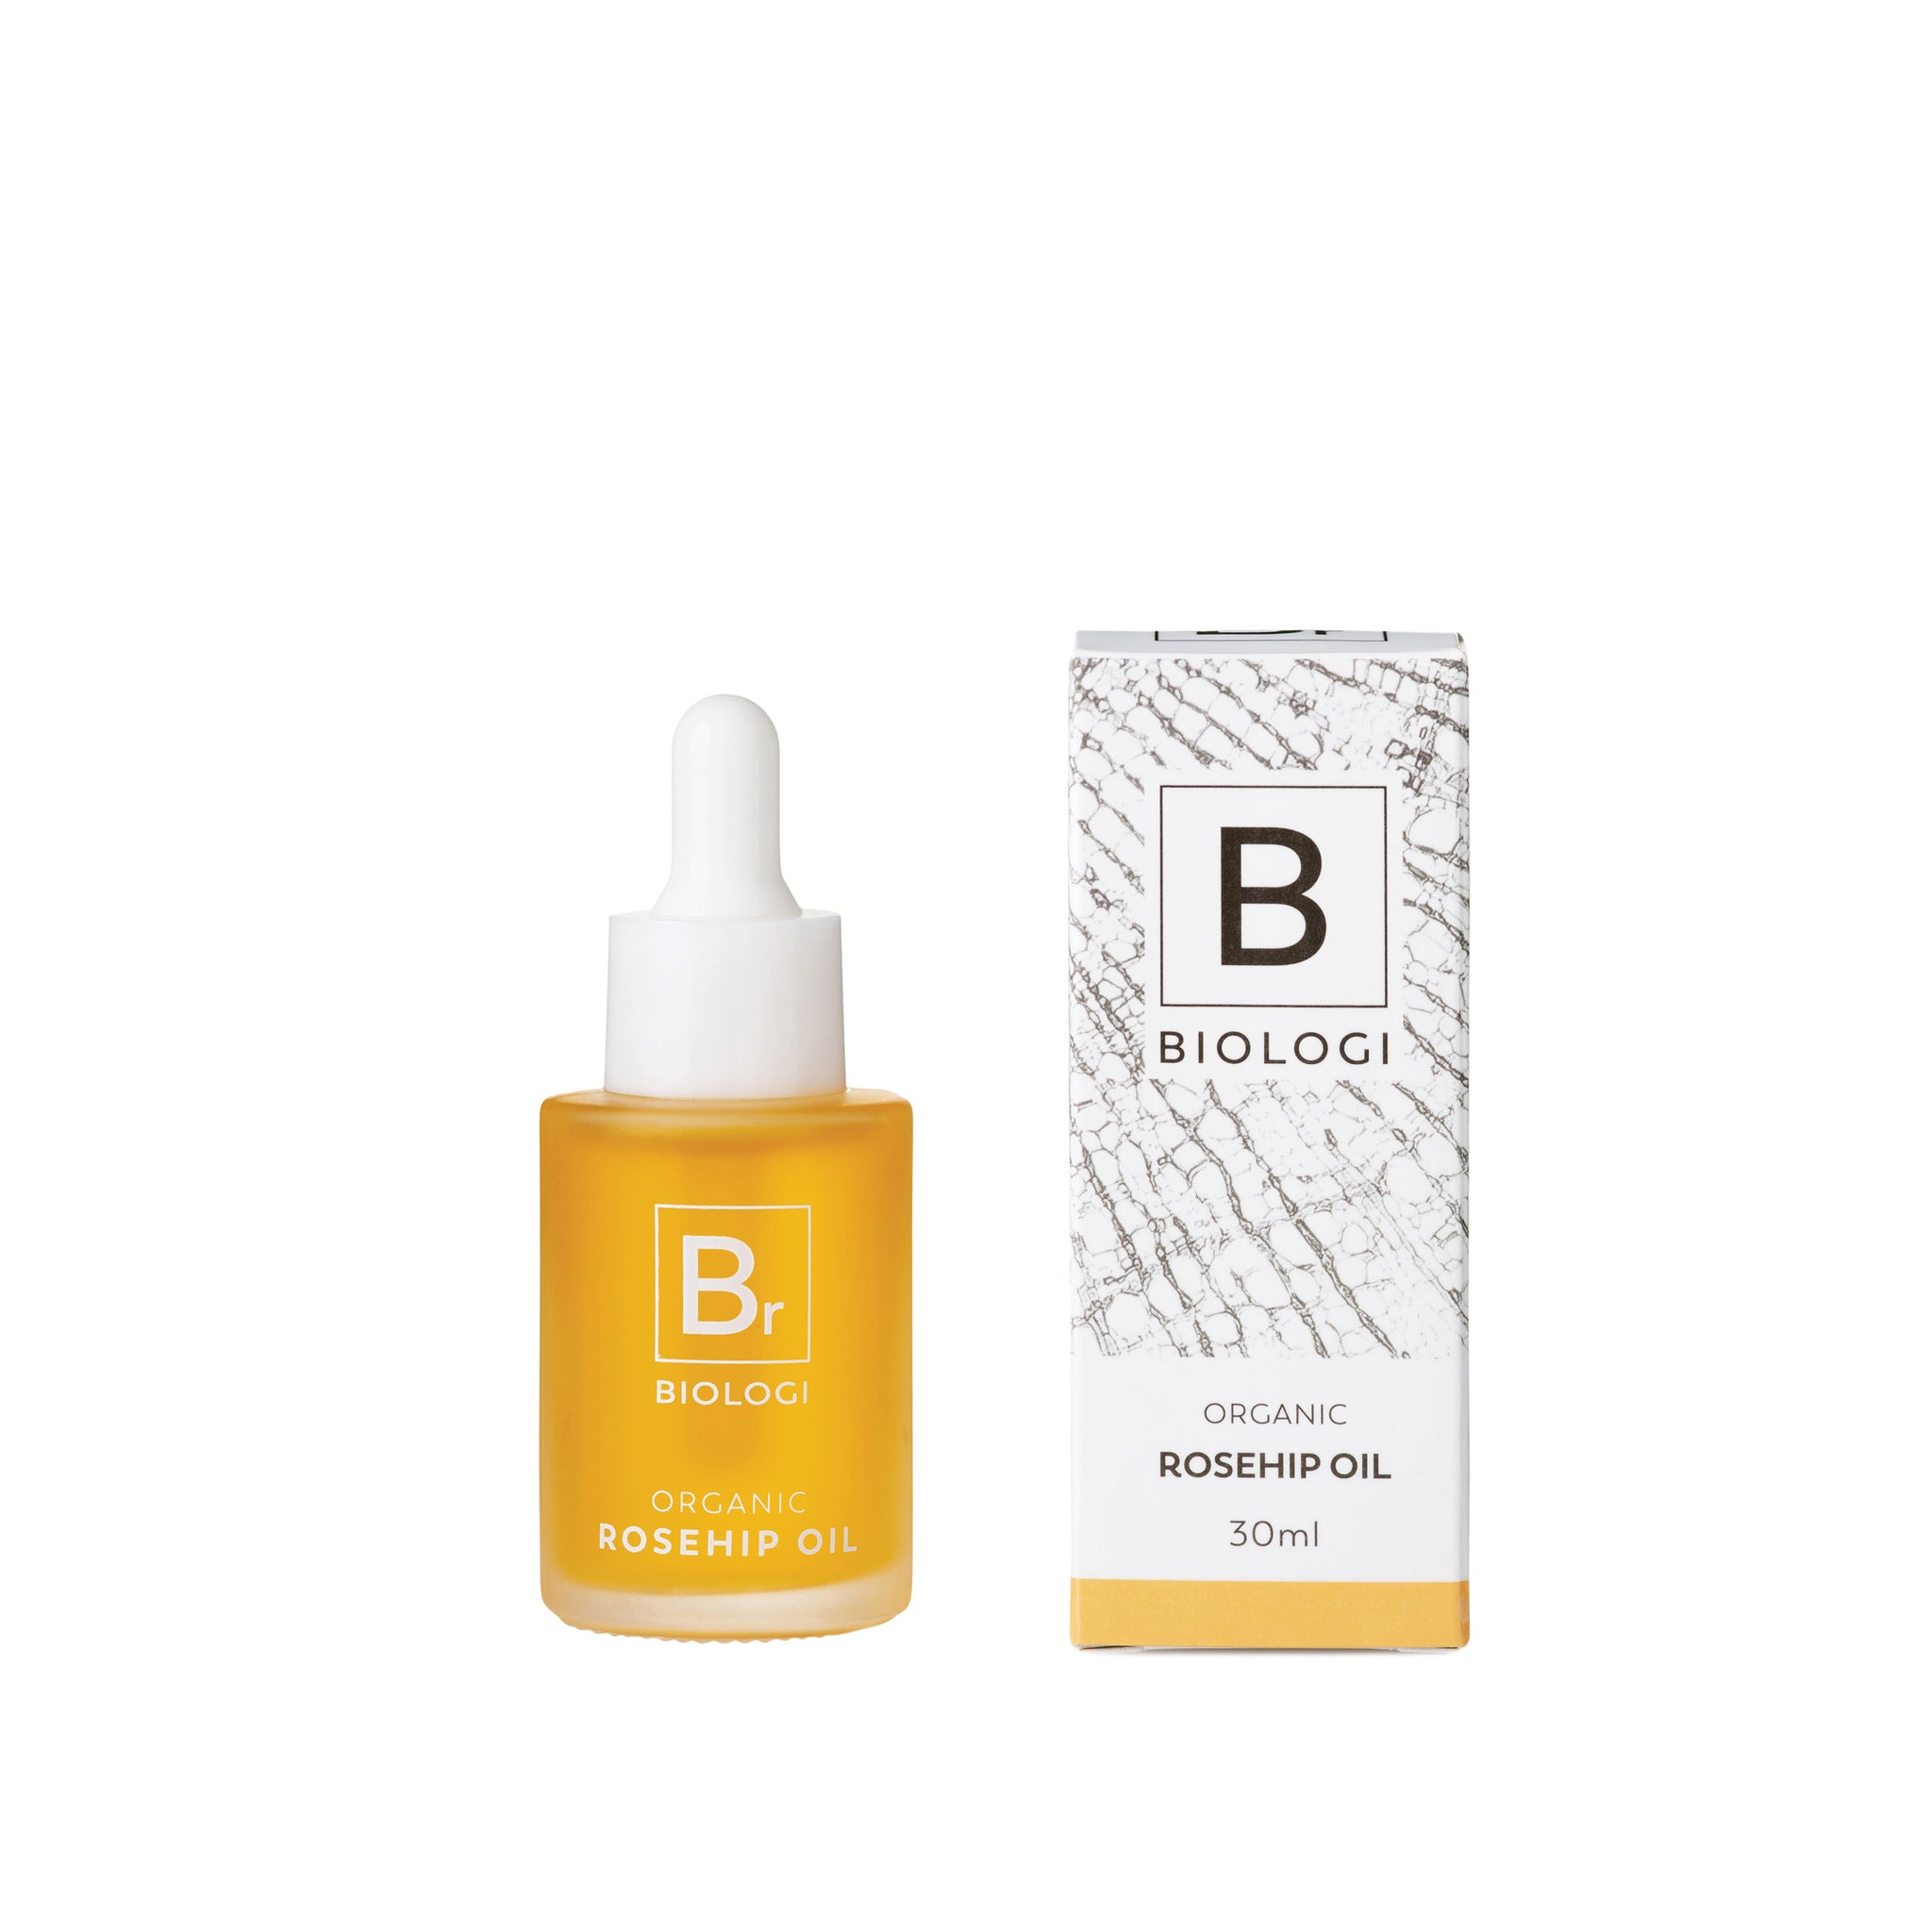 Br Organic Rosehip Oil - Br Organic Rosehip Oil has defined a new benchmark in skincare oils.  Harnessing the pure power of Rosa canina. Nourished x Biologi